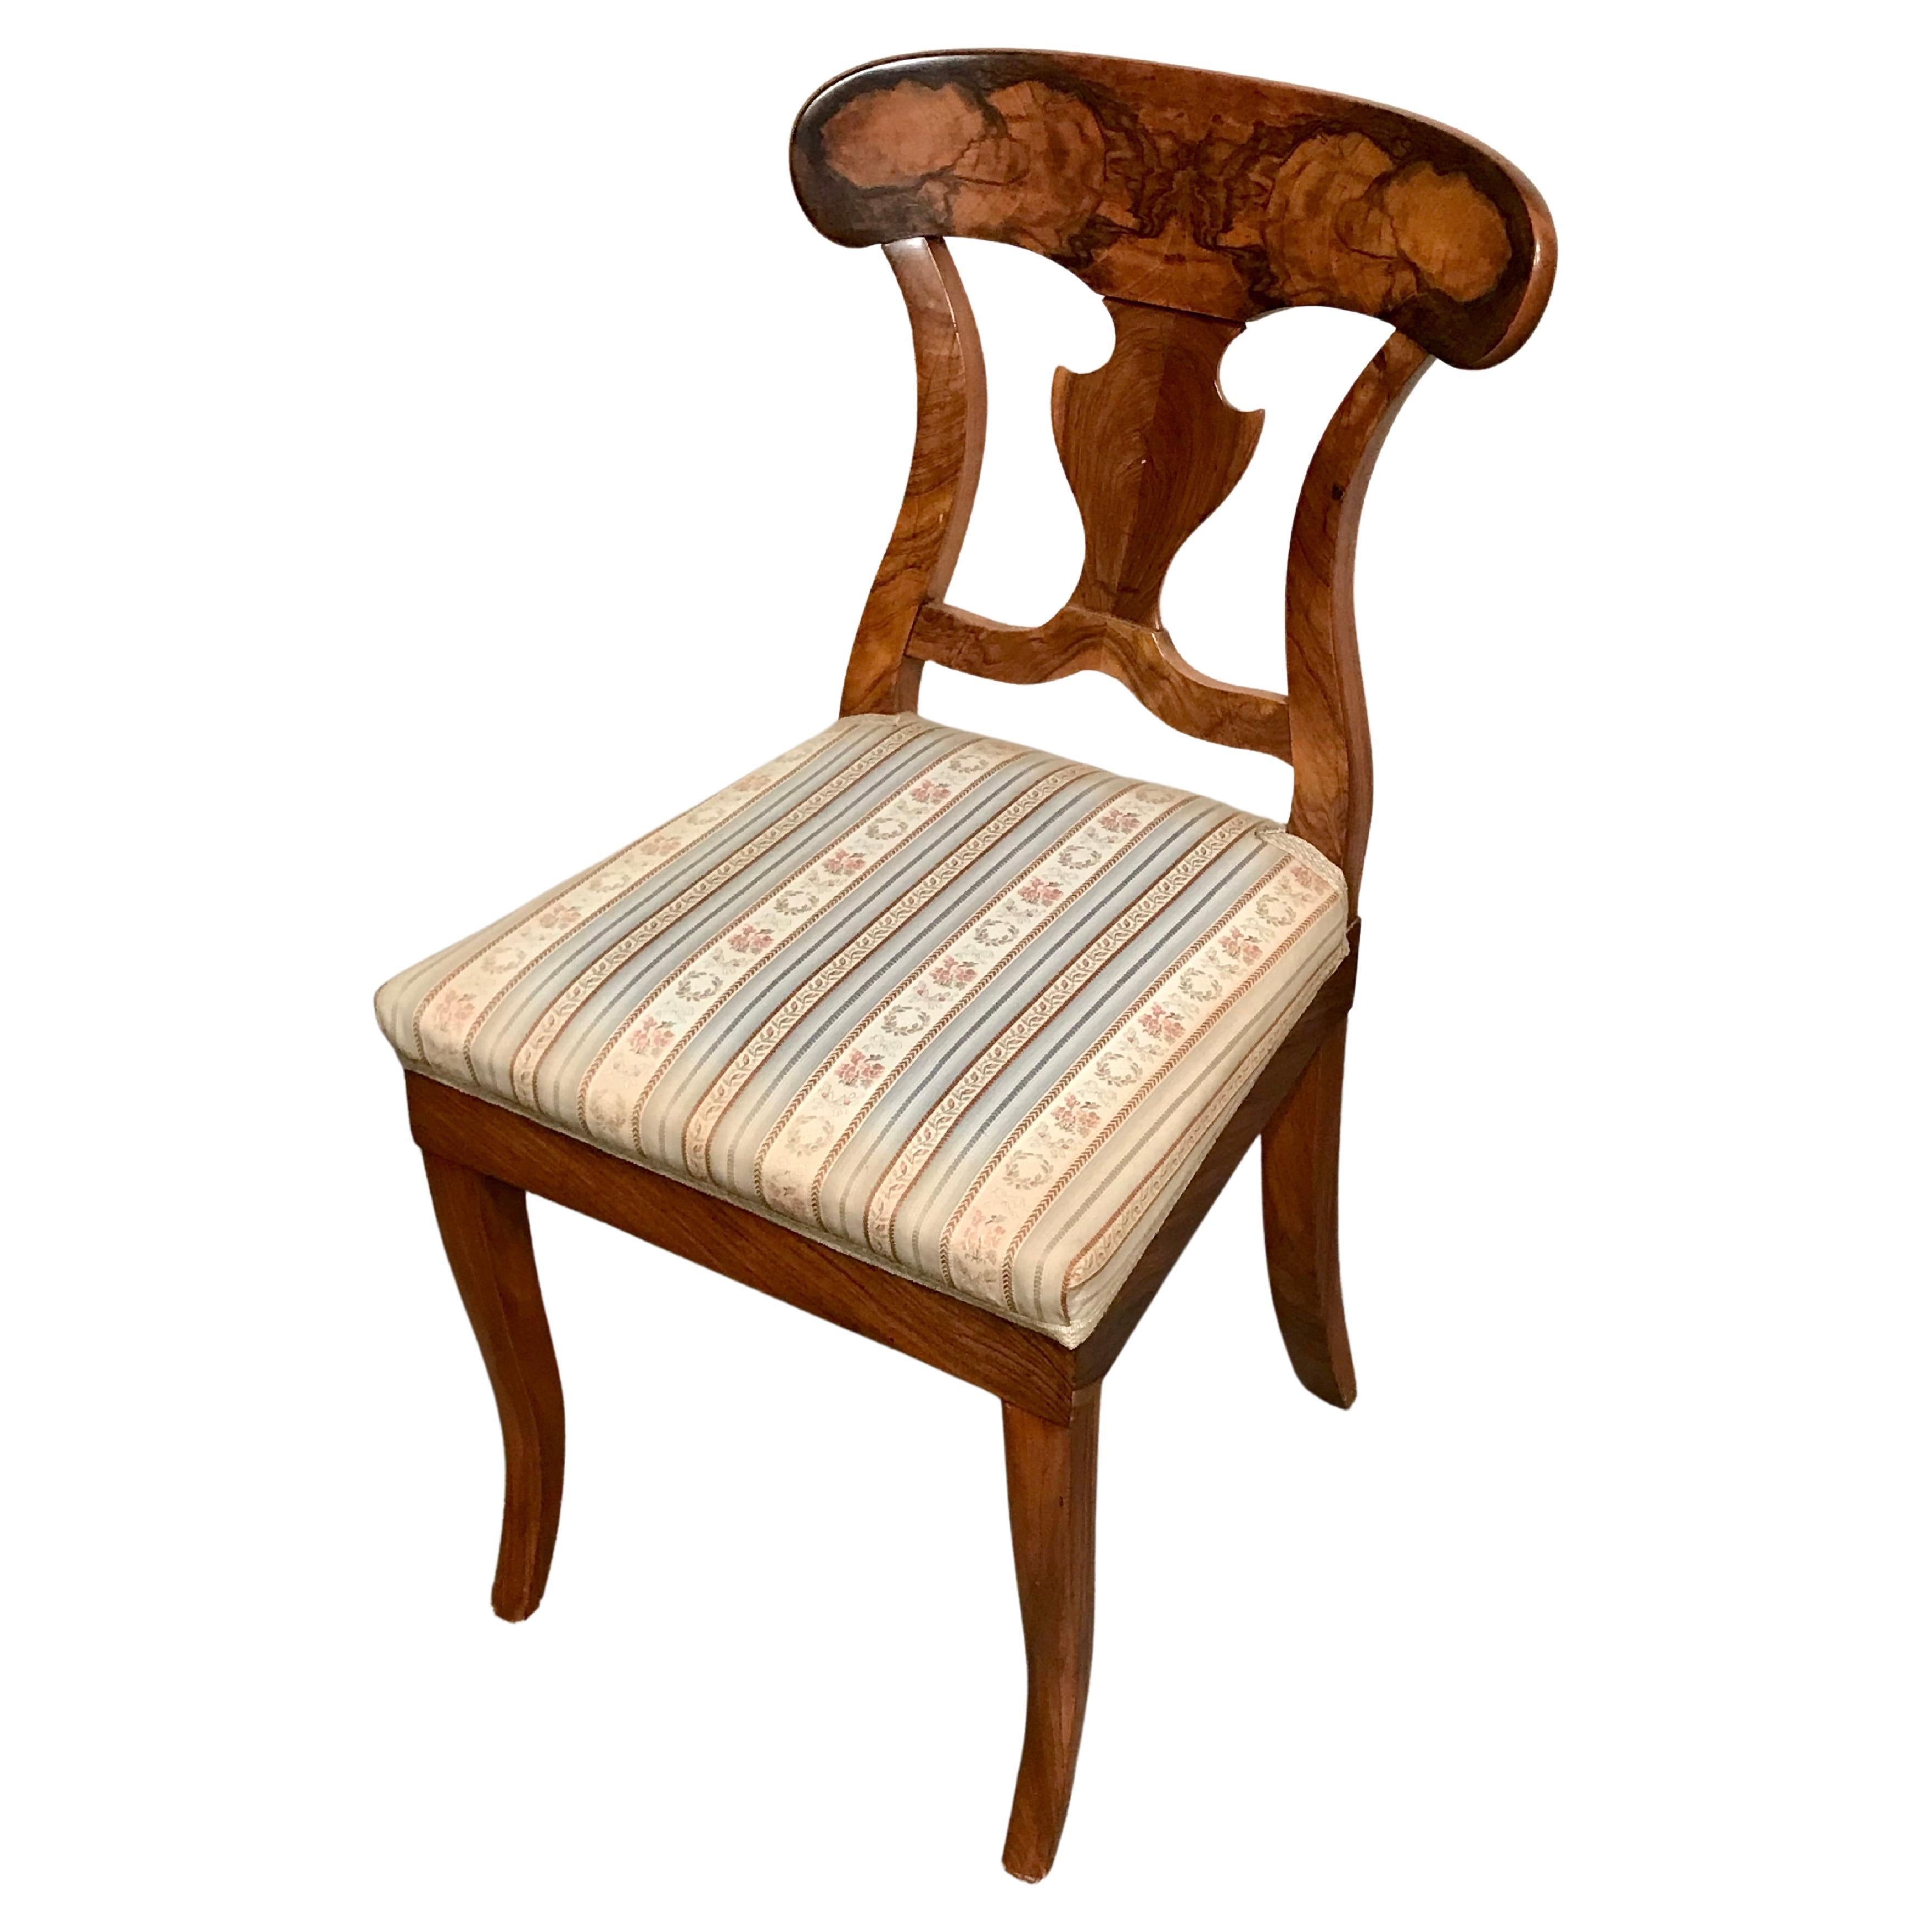 Pair of Biedermeier chairs, South West Germany 1820, walnut veneer. Original pair of Biedermeier chairs with a nicely designed back which features a beautiful walnut veneer grain.  The chairs are in good original condition. On the bottom of the